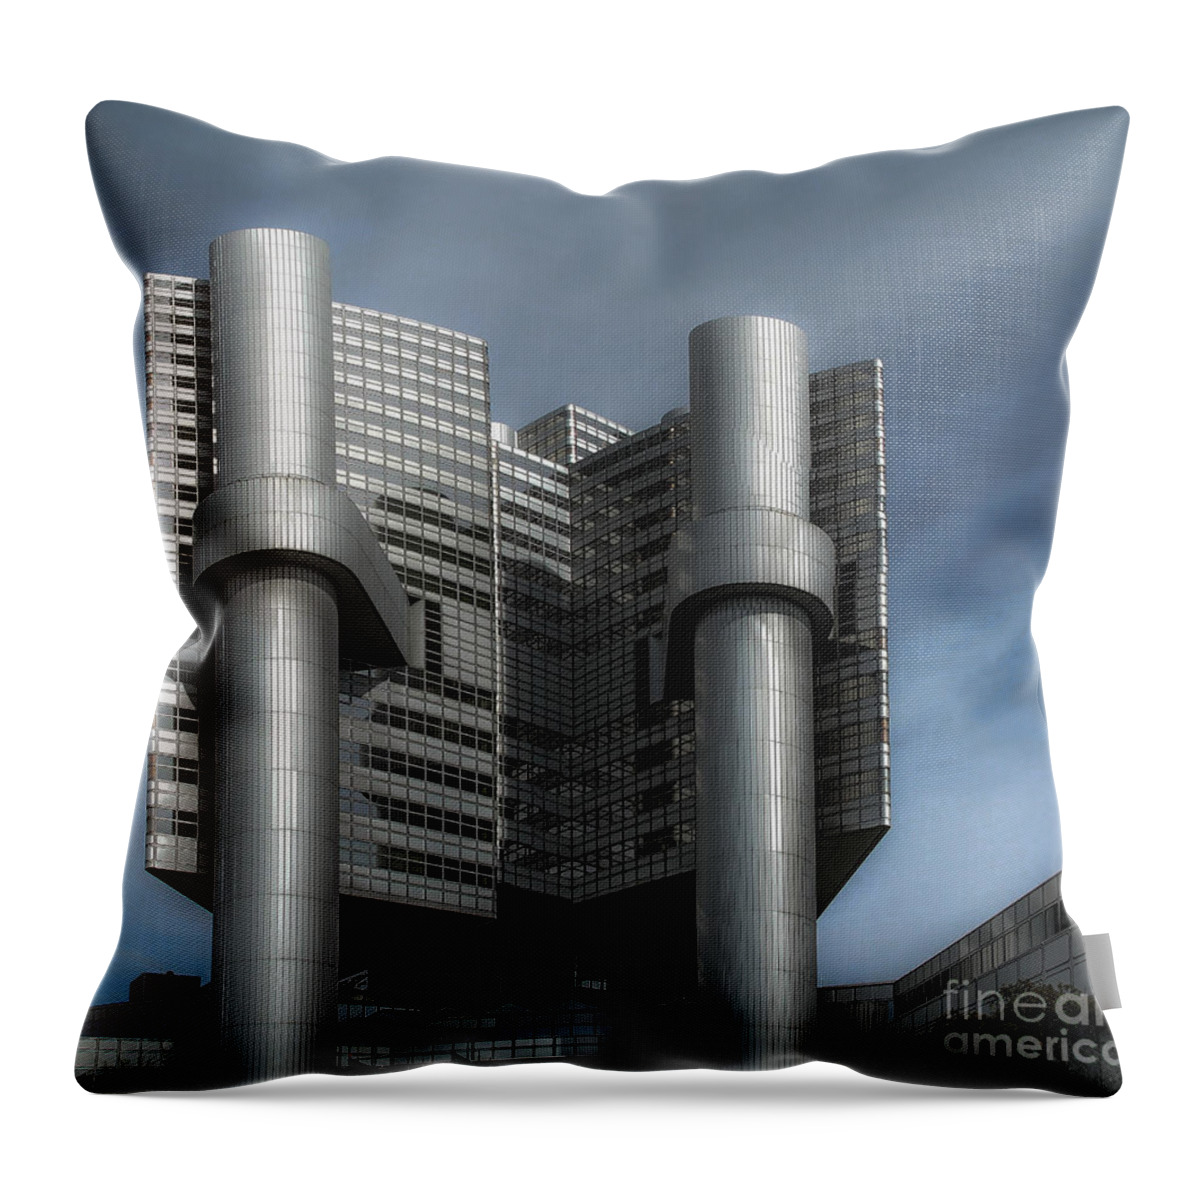 Hypo Vereins Bank Throw Pillow featuring the photograph HVB Building by Hannes Cmarits